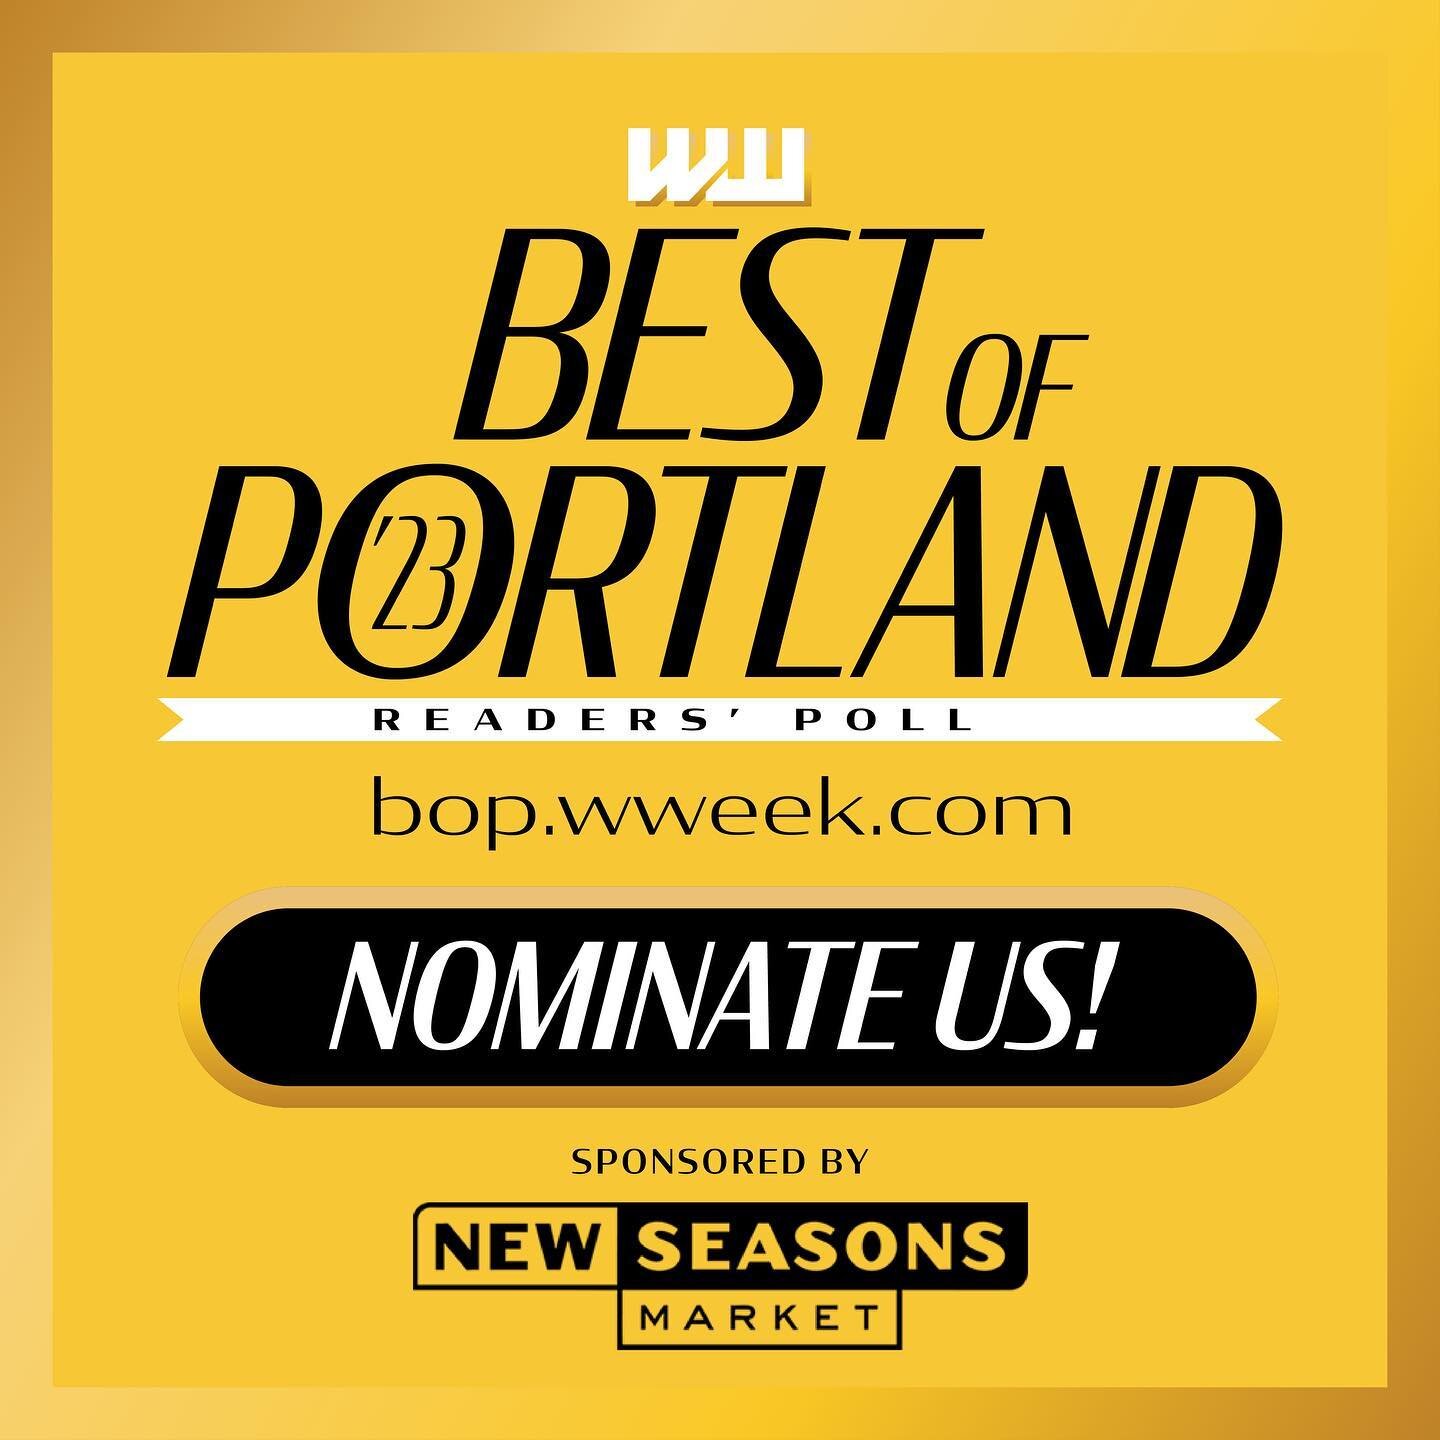 We know you love our amazing practitioners and we need your help giving them some much-deserved recognition! Link in bio to vote for Best Acupuncturist, best Massage Therapist and best Natural or Alternative Medicine Clinic! 

#portlandwellness #turn